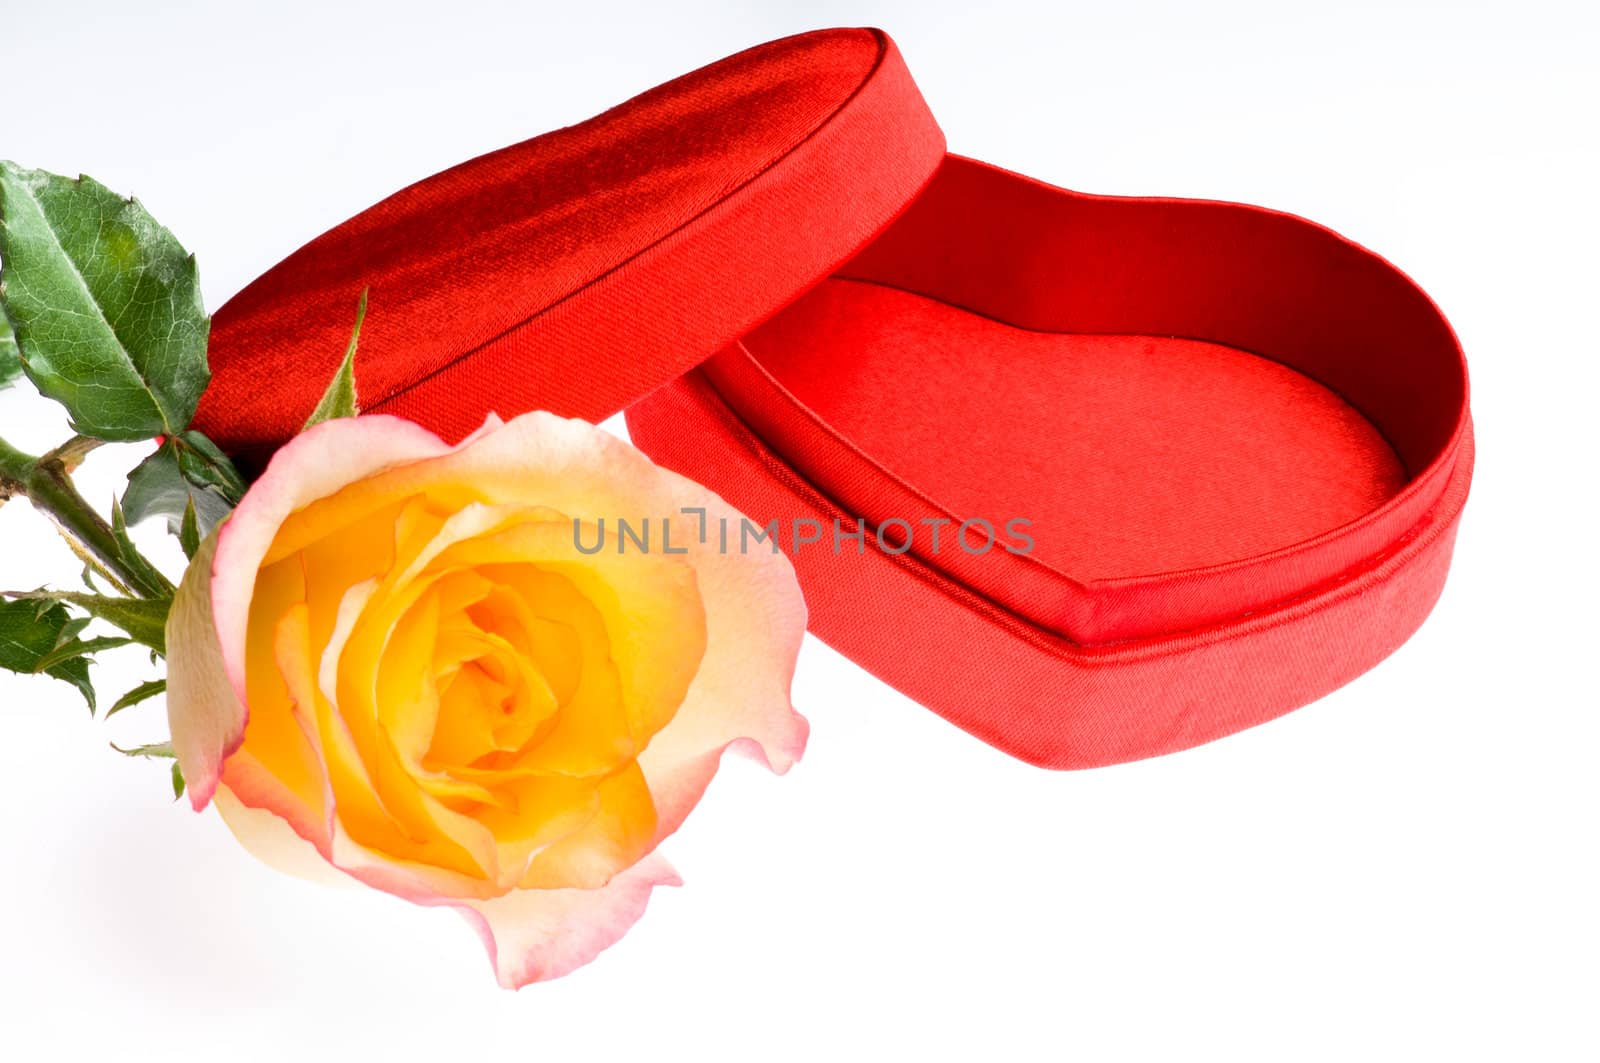 Red yellow rose and a open heart shape box over white